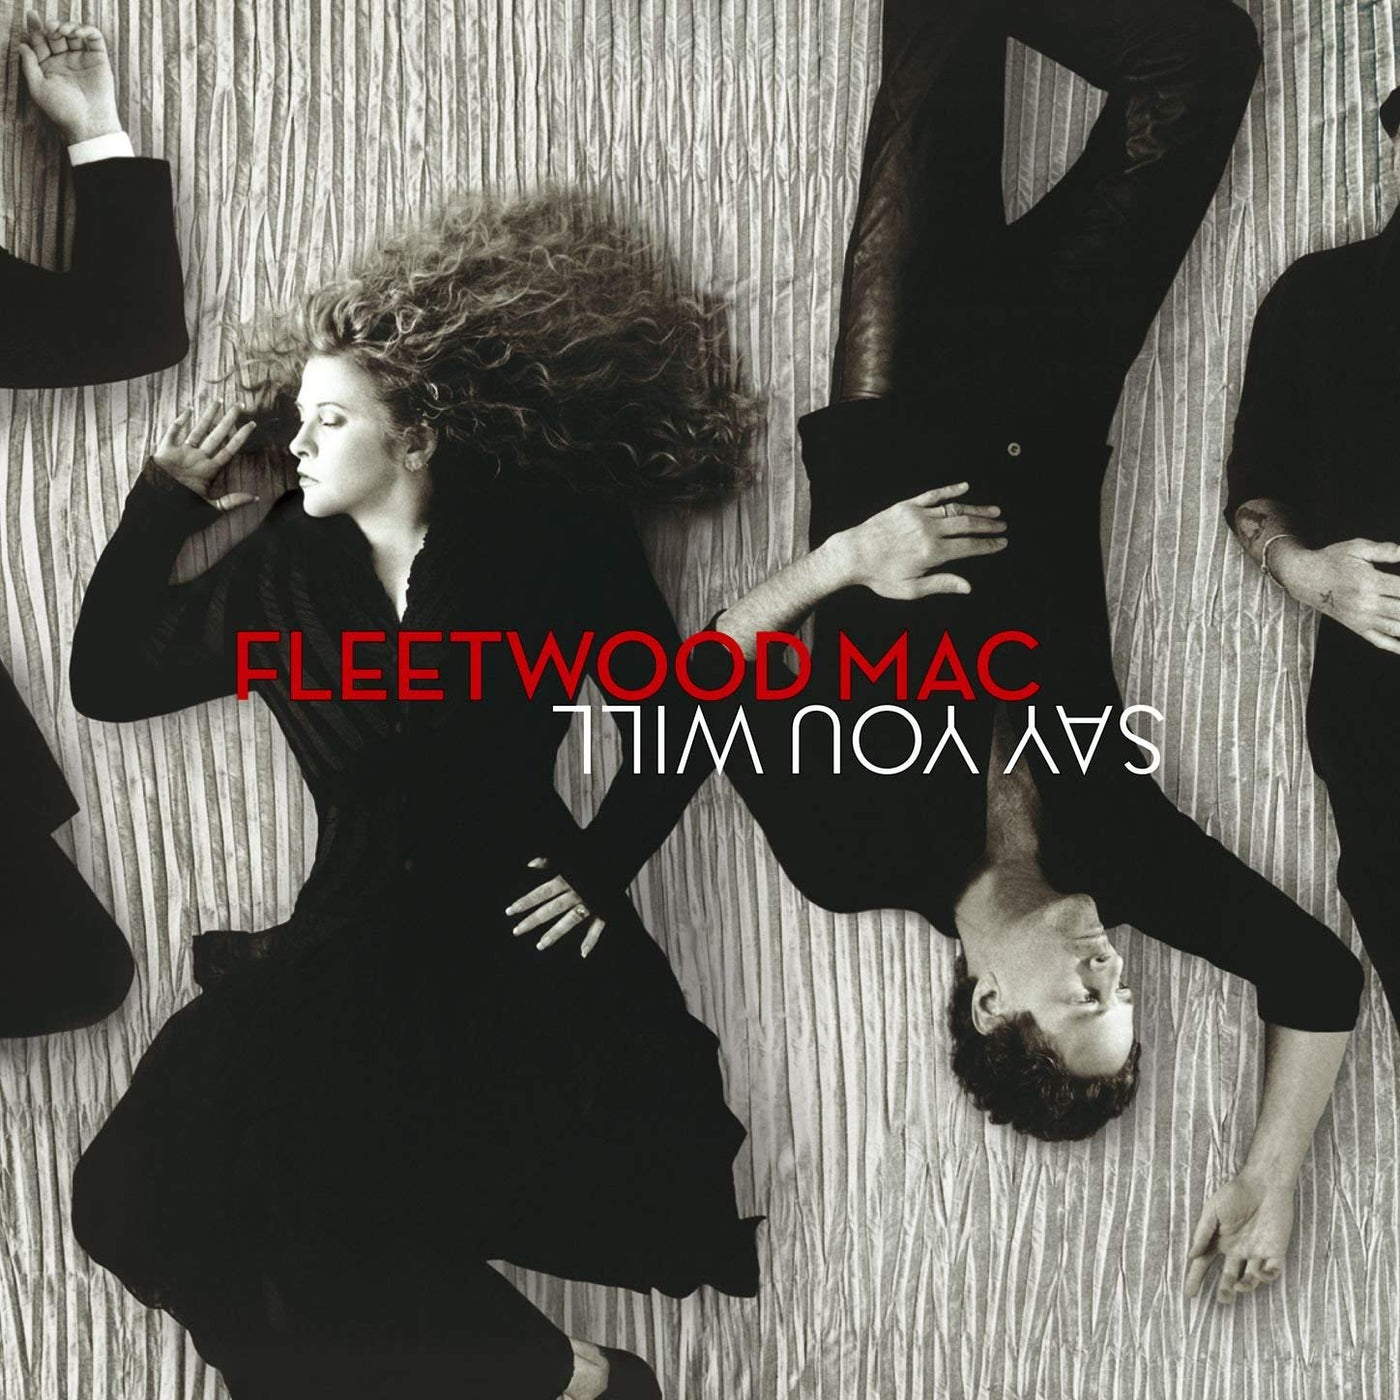 fleetwood mac say you will free mp3 download